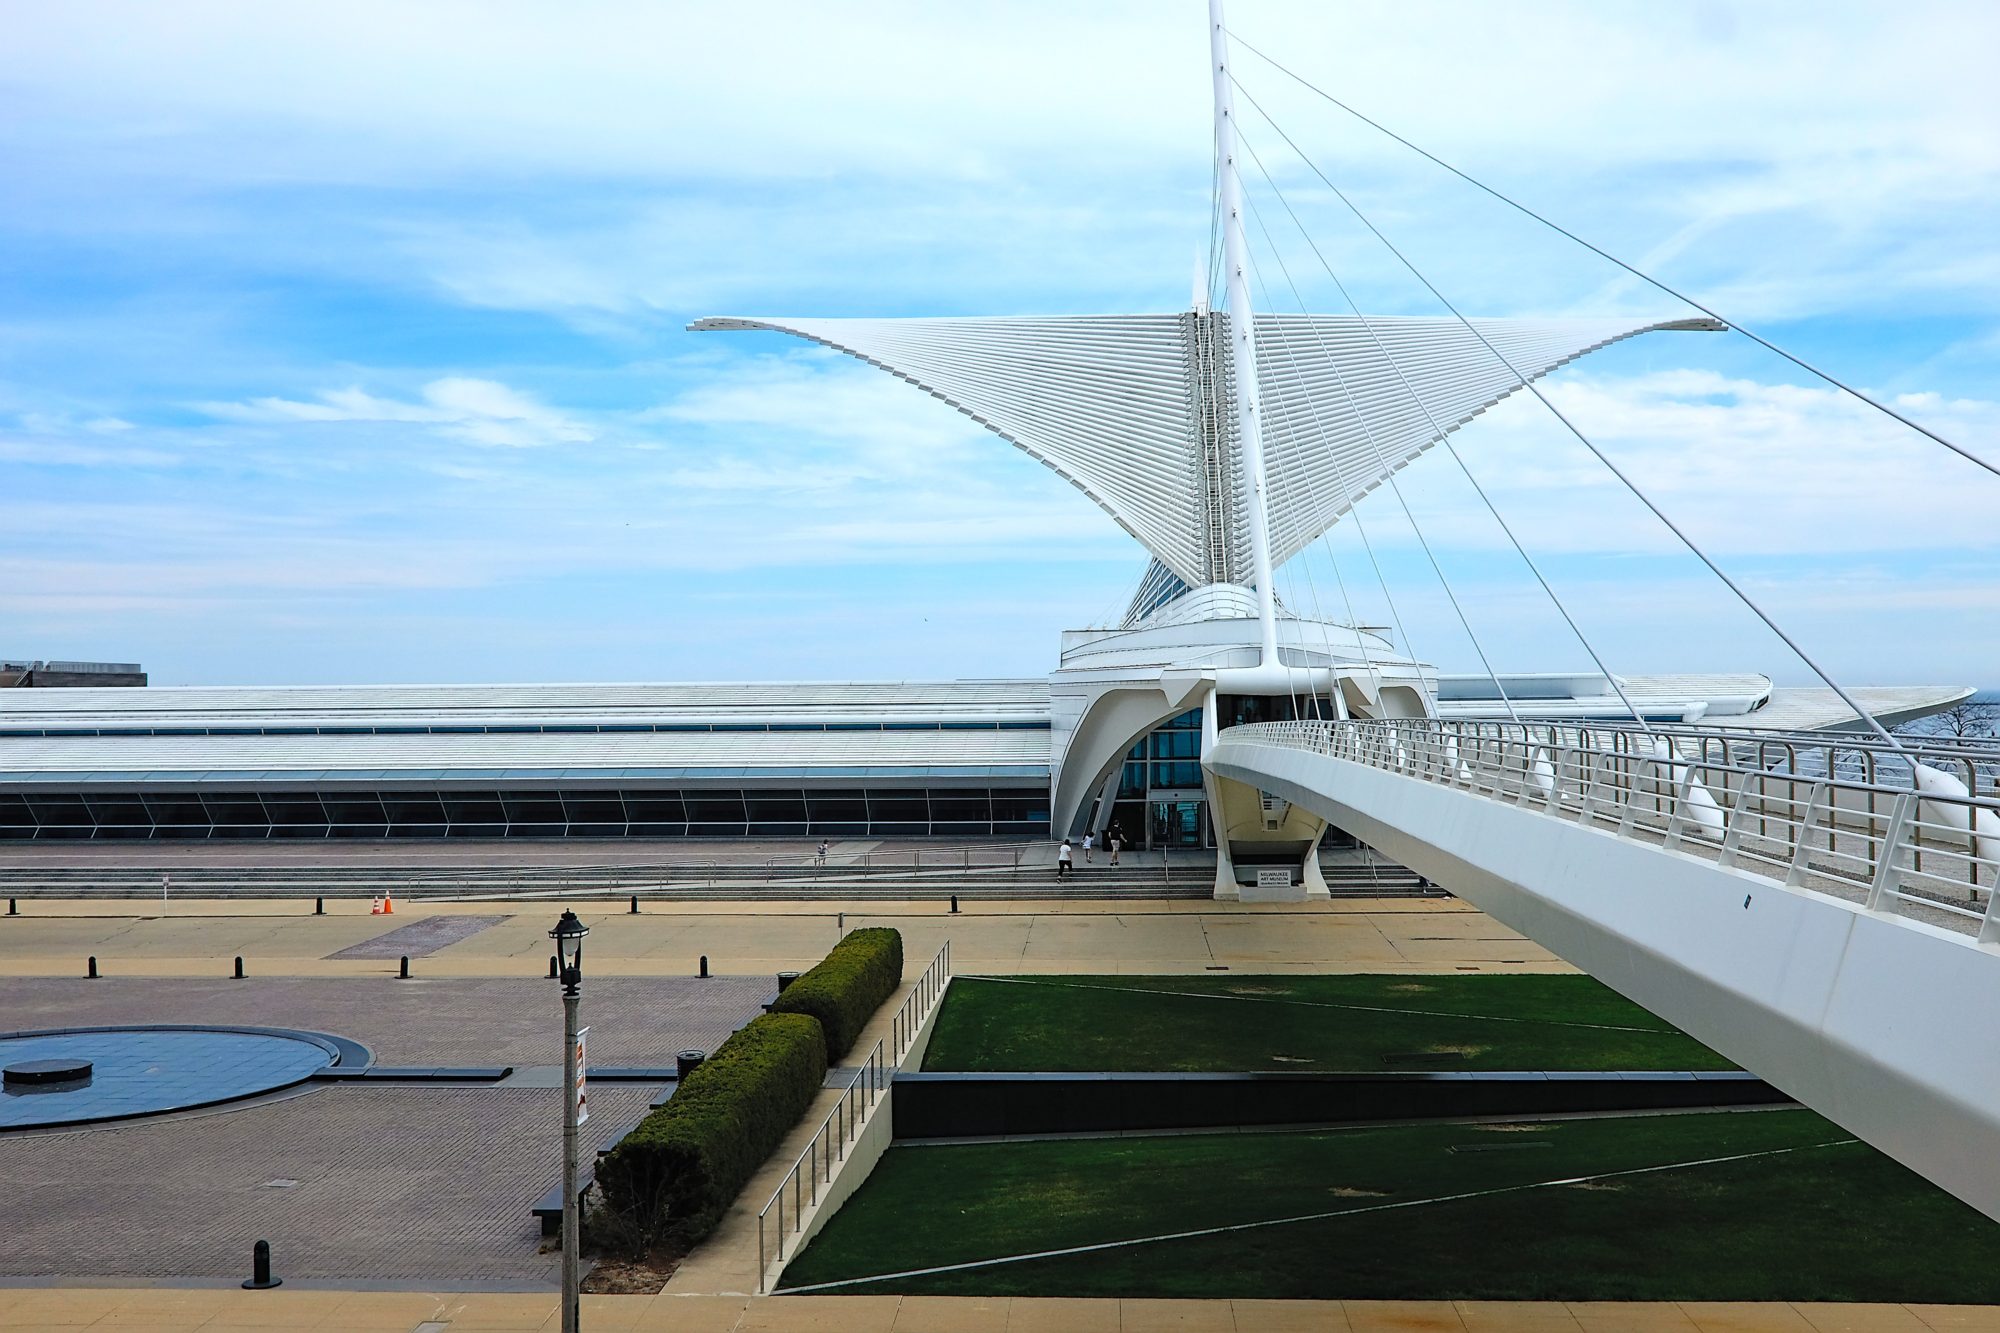 View of the Milwaukee Art Museum's wings